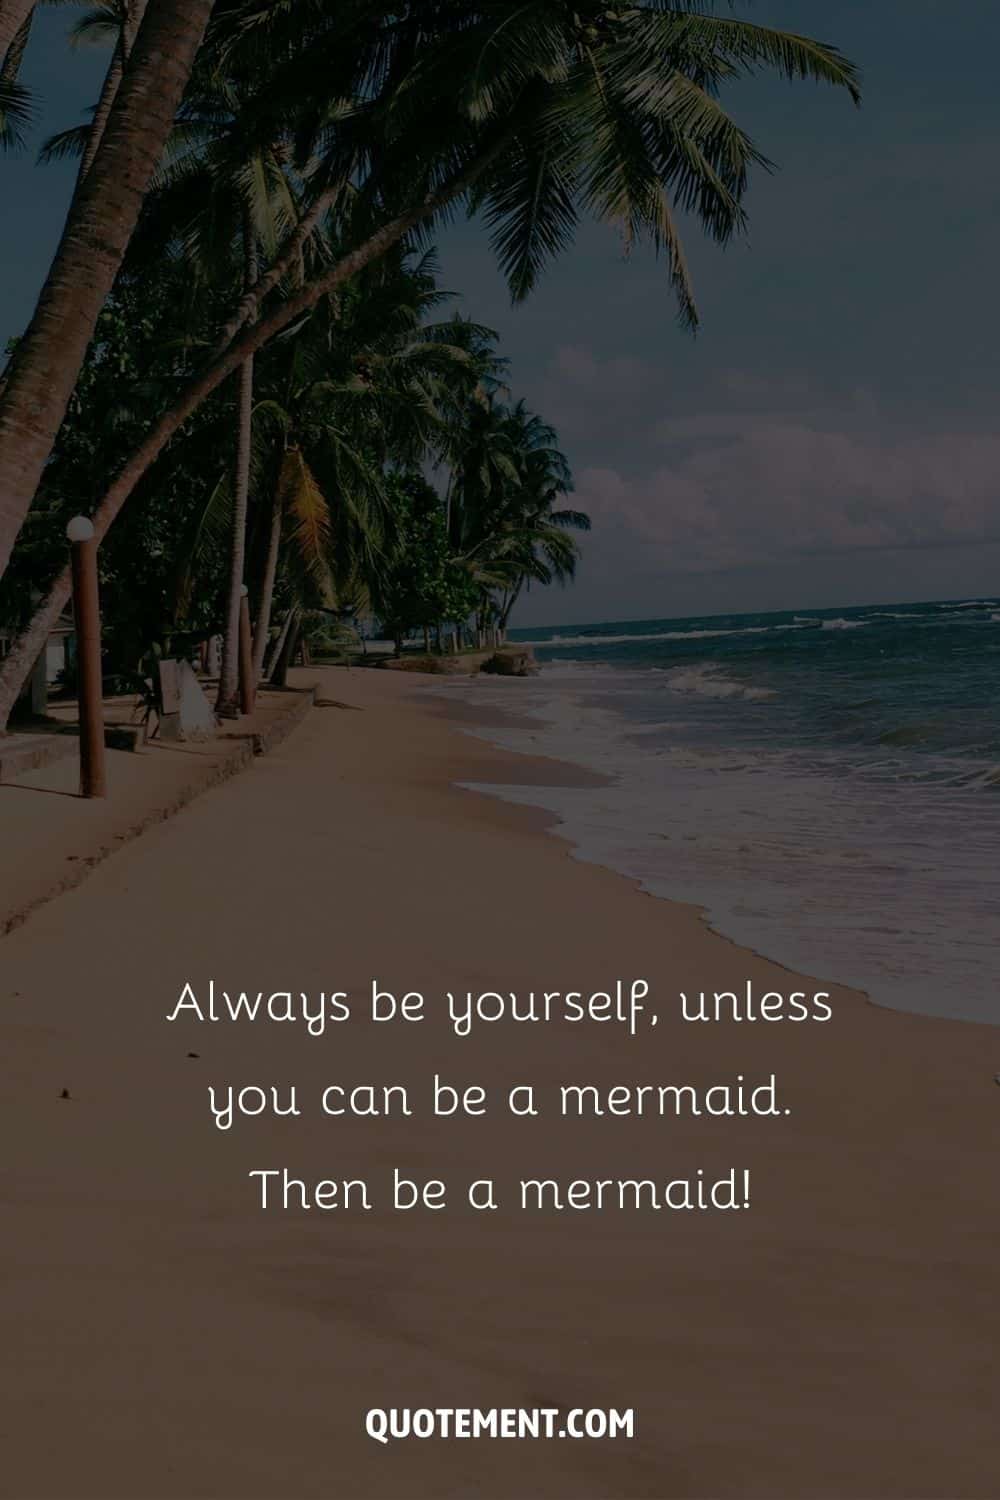 Always be yourself, unless you can be a mermaid. Then be a mermaid! – Unknown